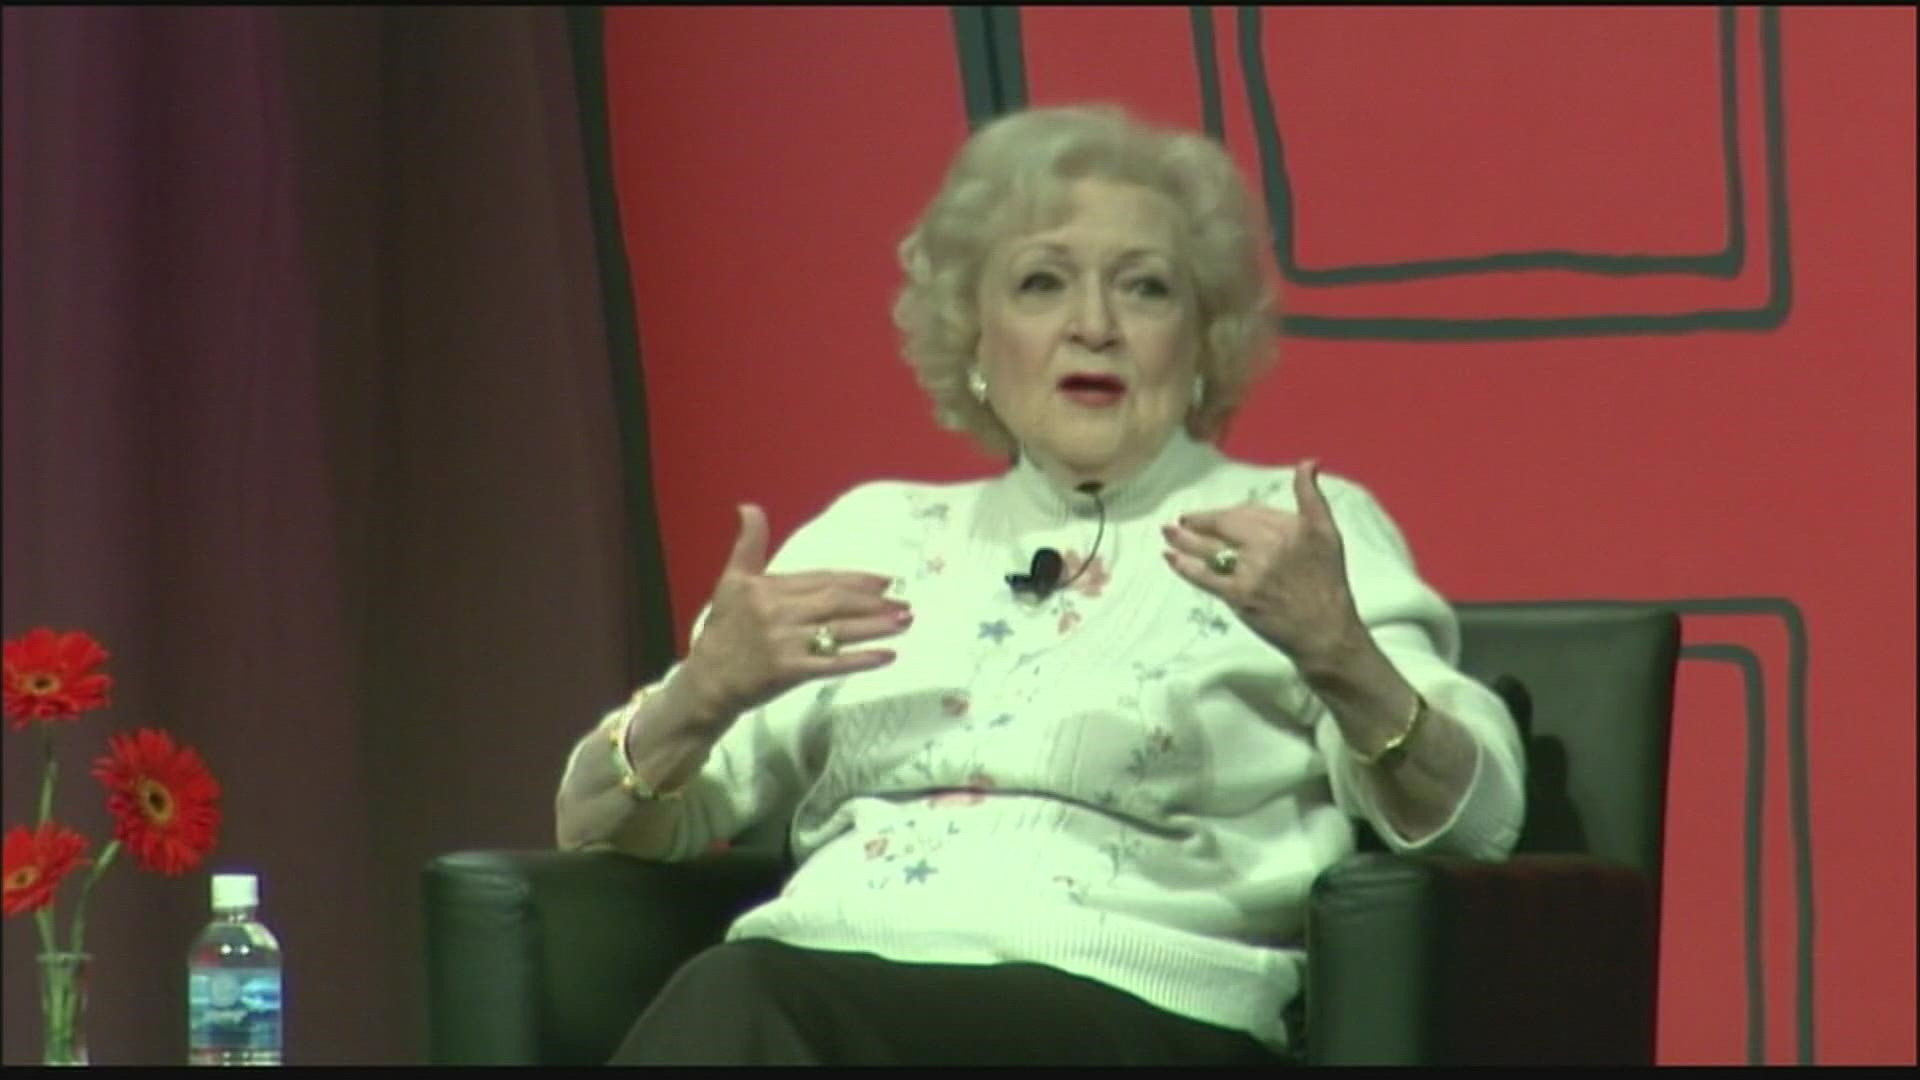 When Betty White came to Laughfest in 2011, they worked directly with her during her time in Grand Rapids.